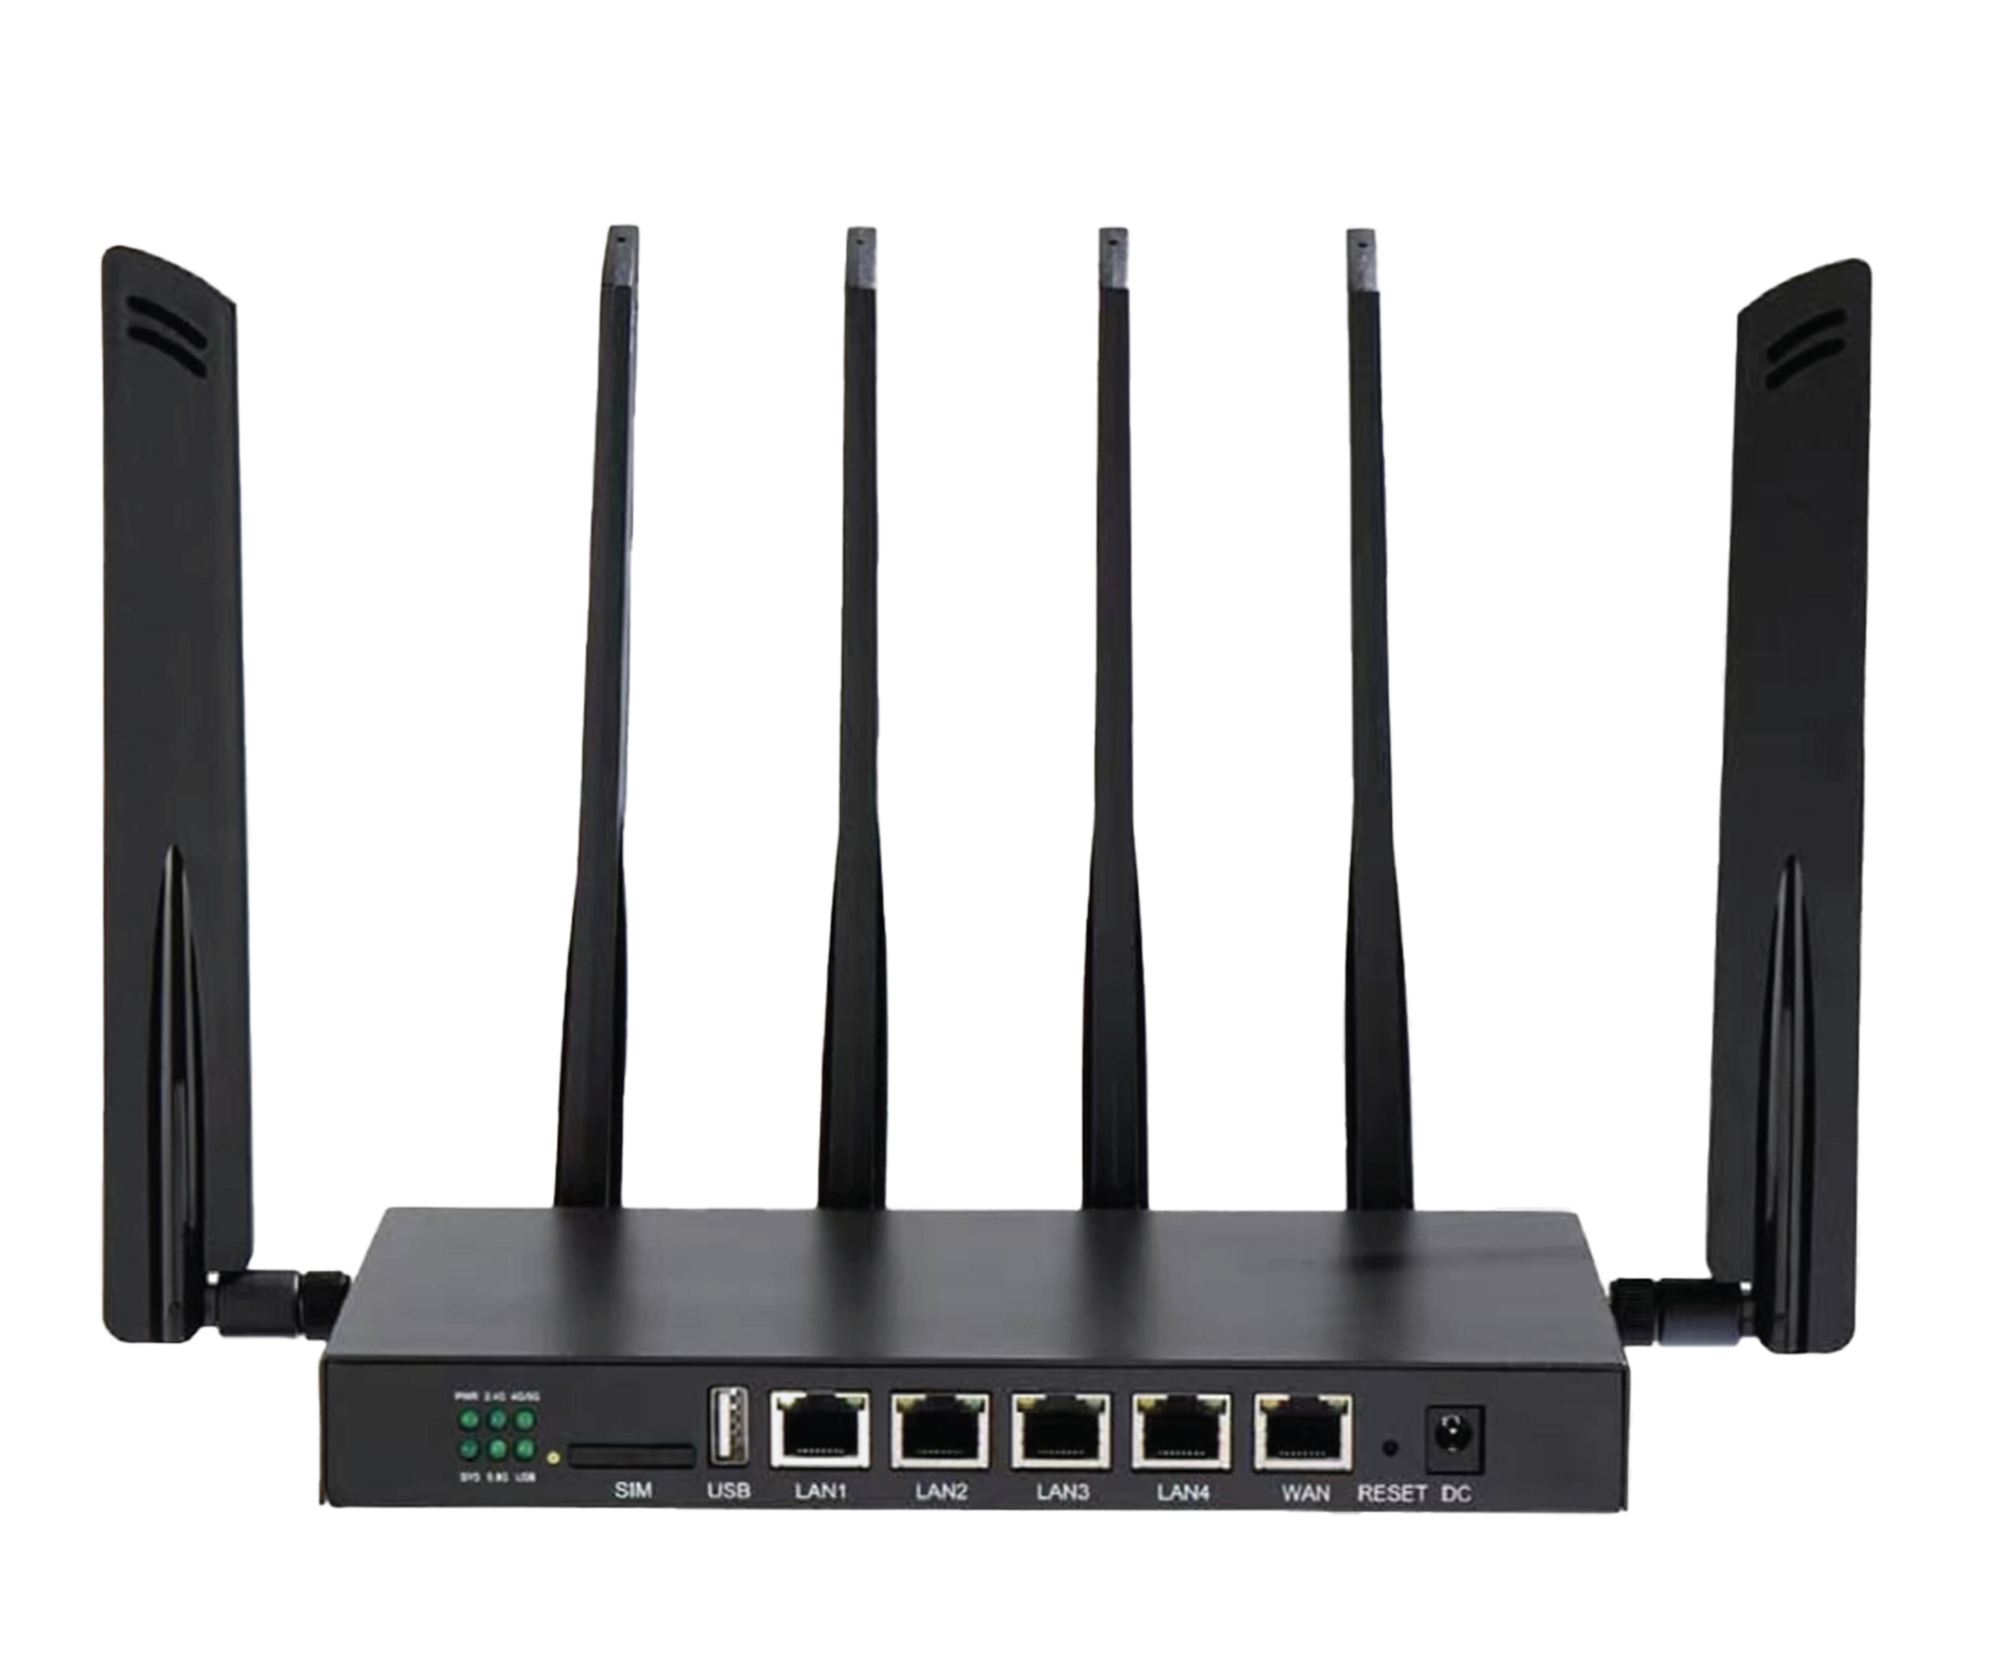 5G Router